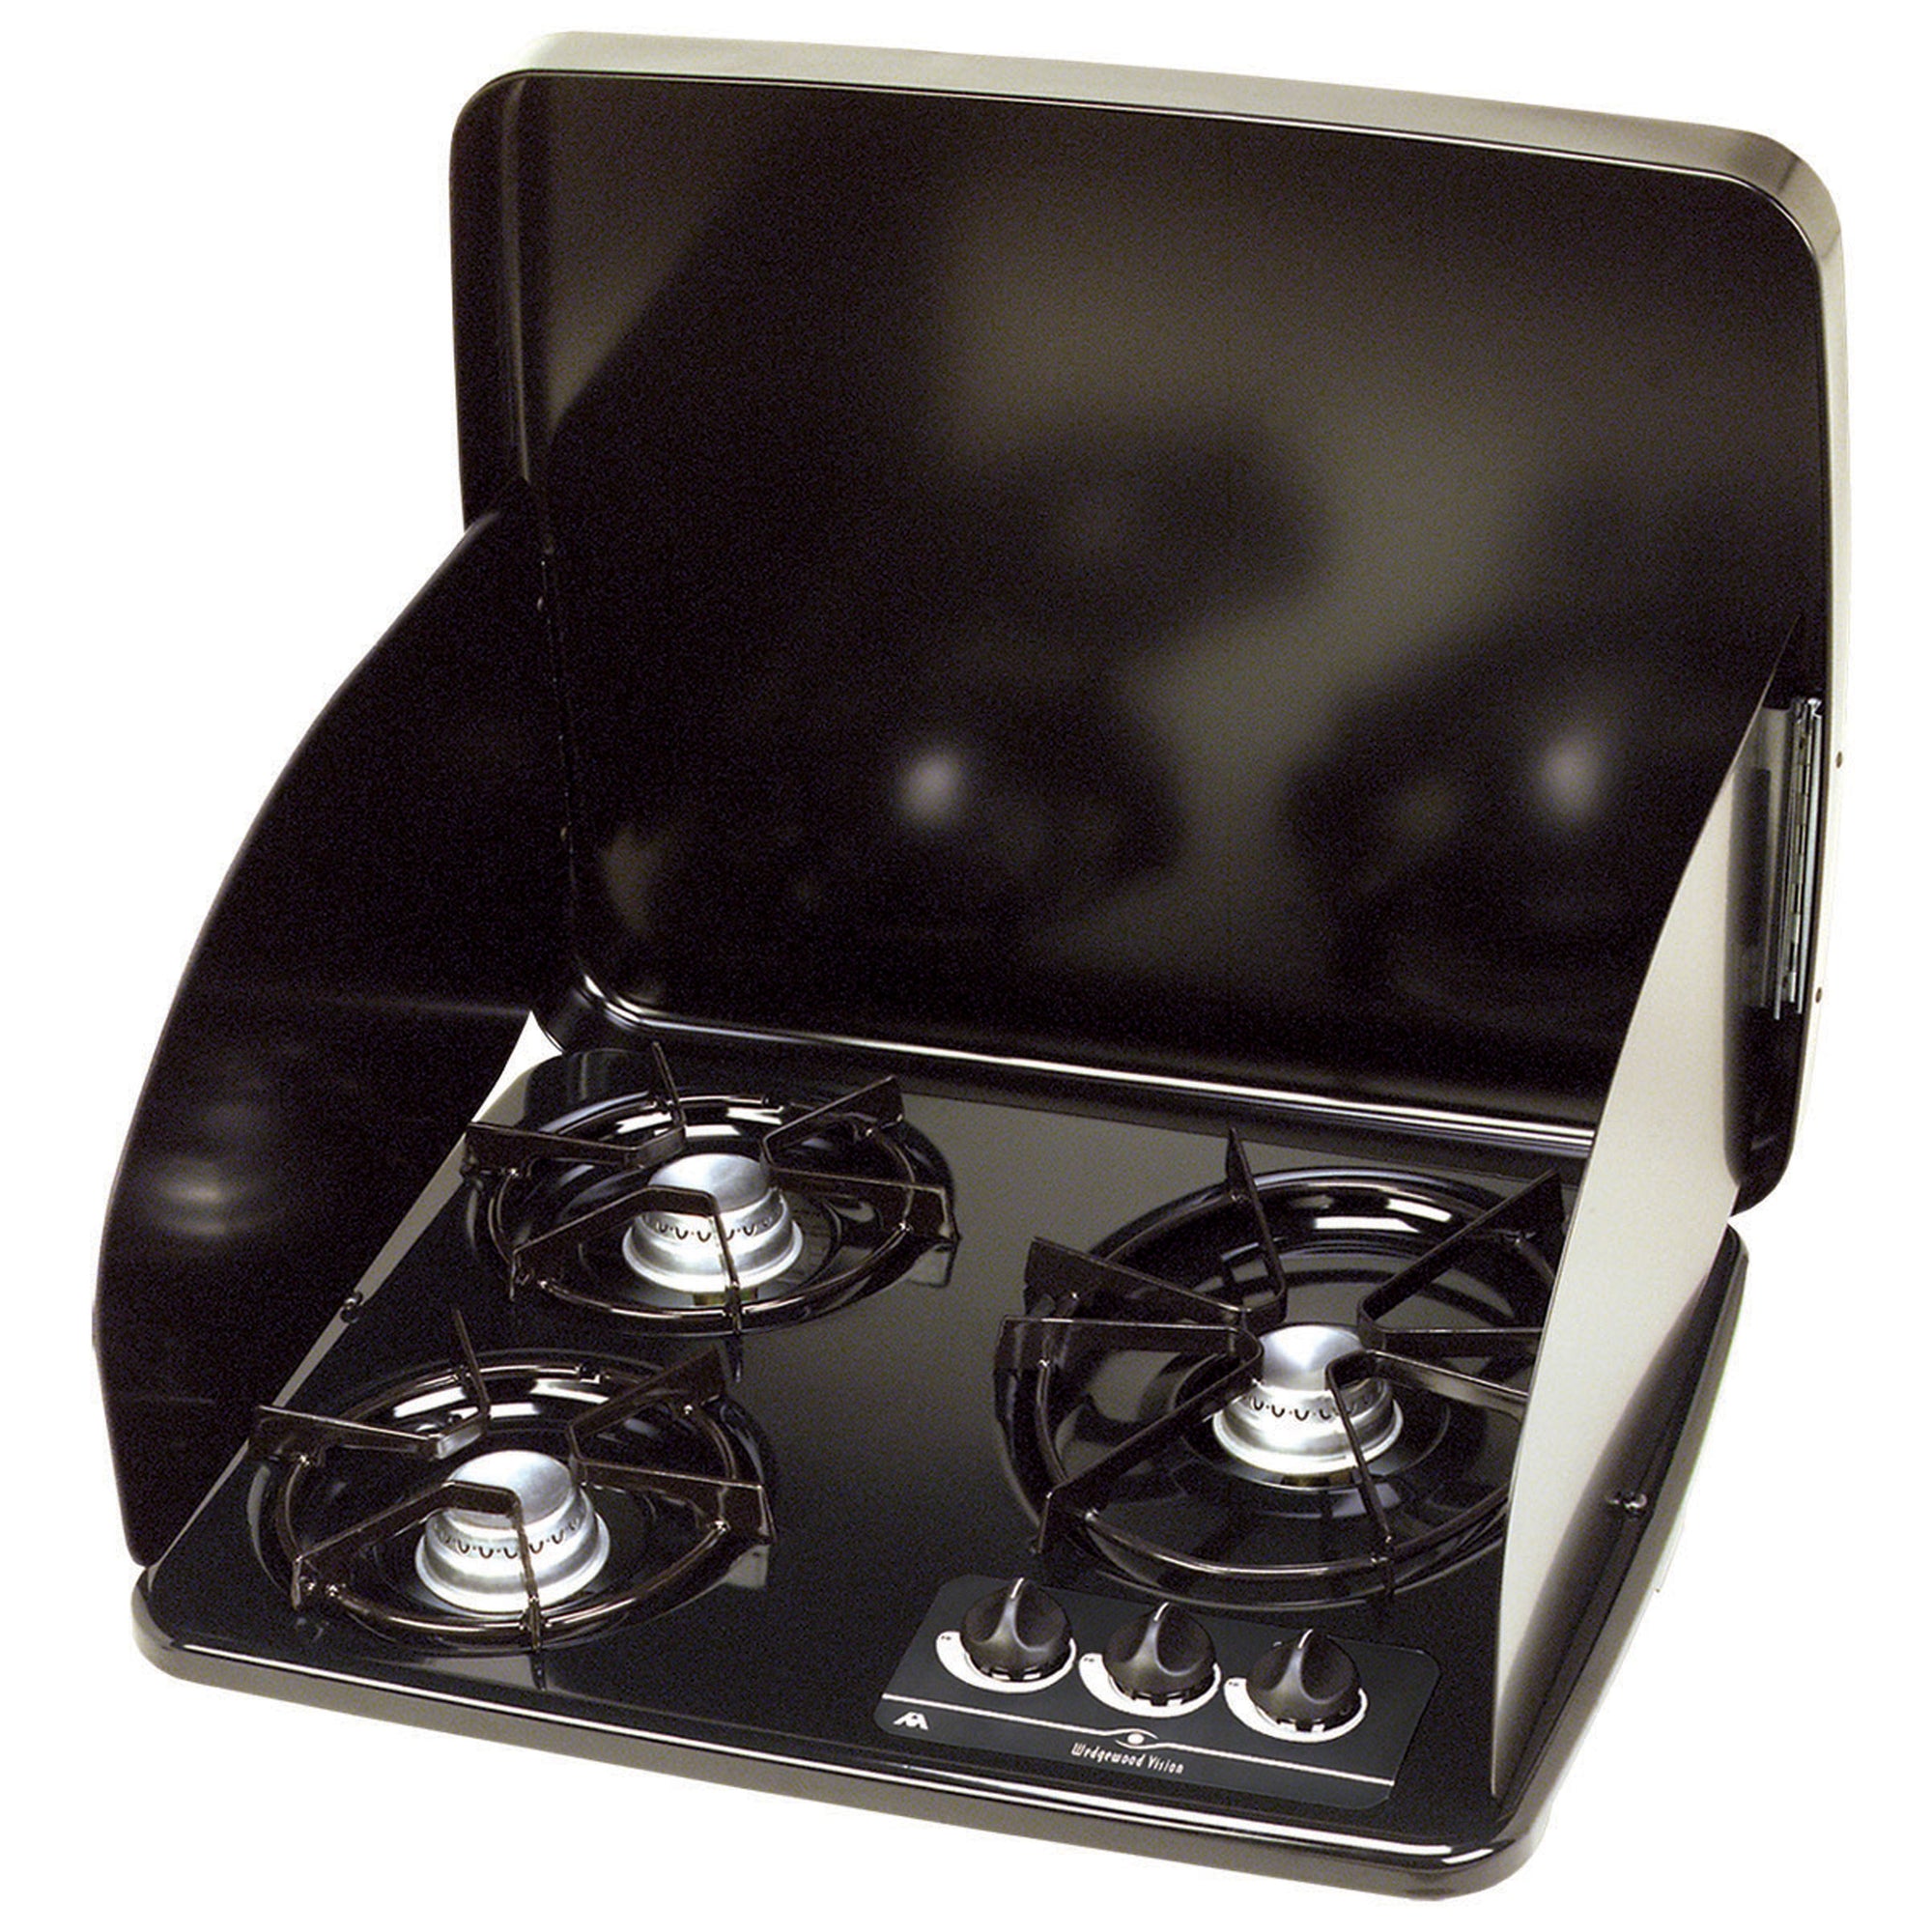 Atwood 56459 Two-Burner Cooktop Cover - Stainless Steel